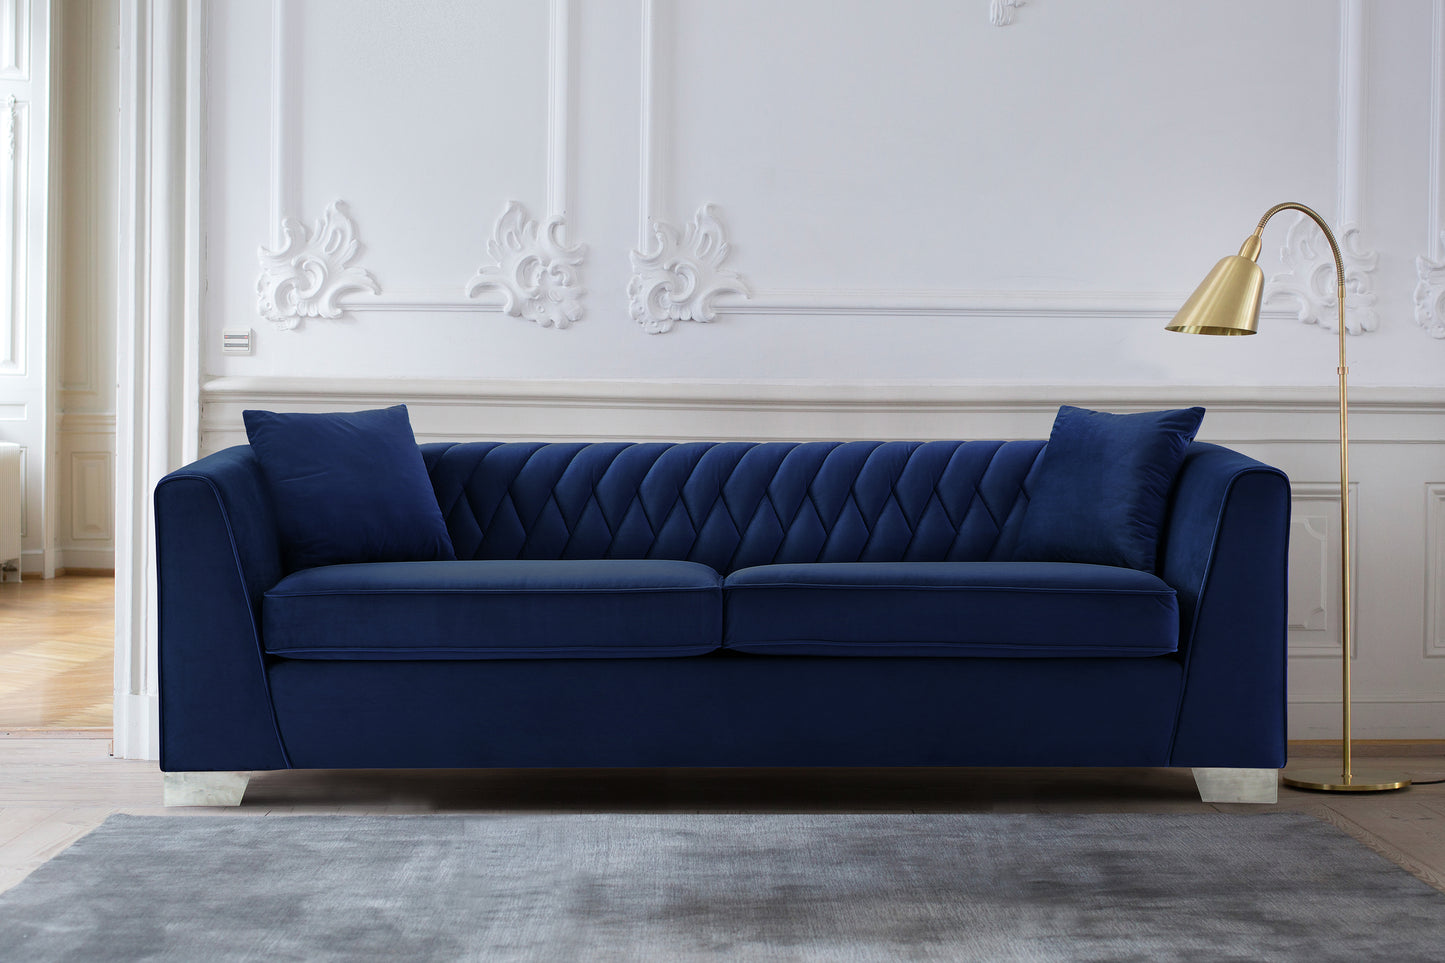 Cambridge Contemporary Sofa in Brushed Stainless Steel and Blue Velvet